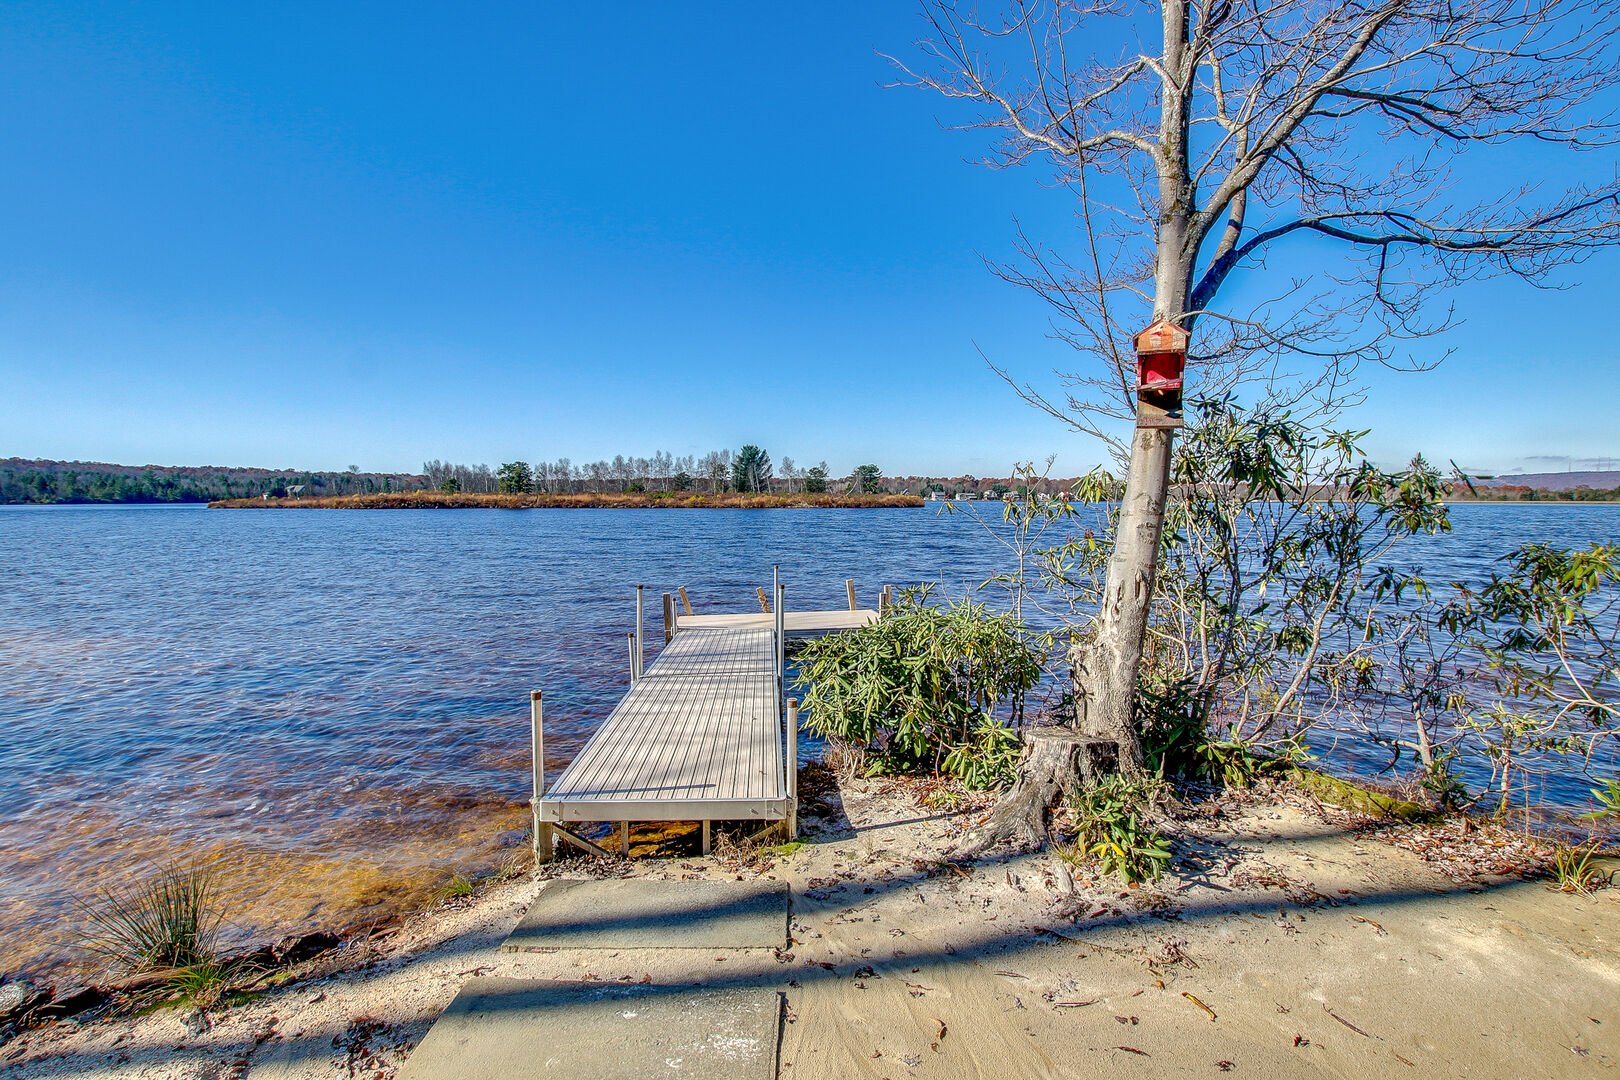 A tree and dock by the lake, located steps away from this rental.